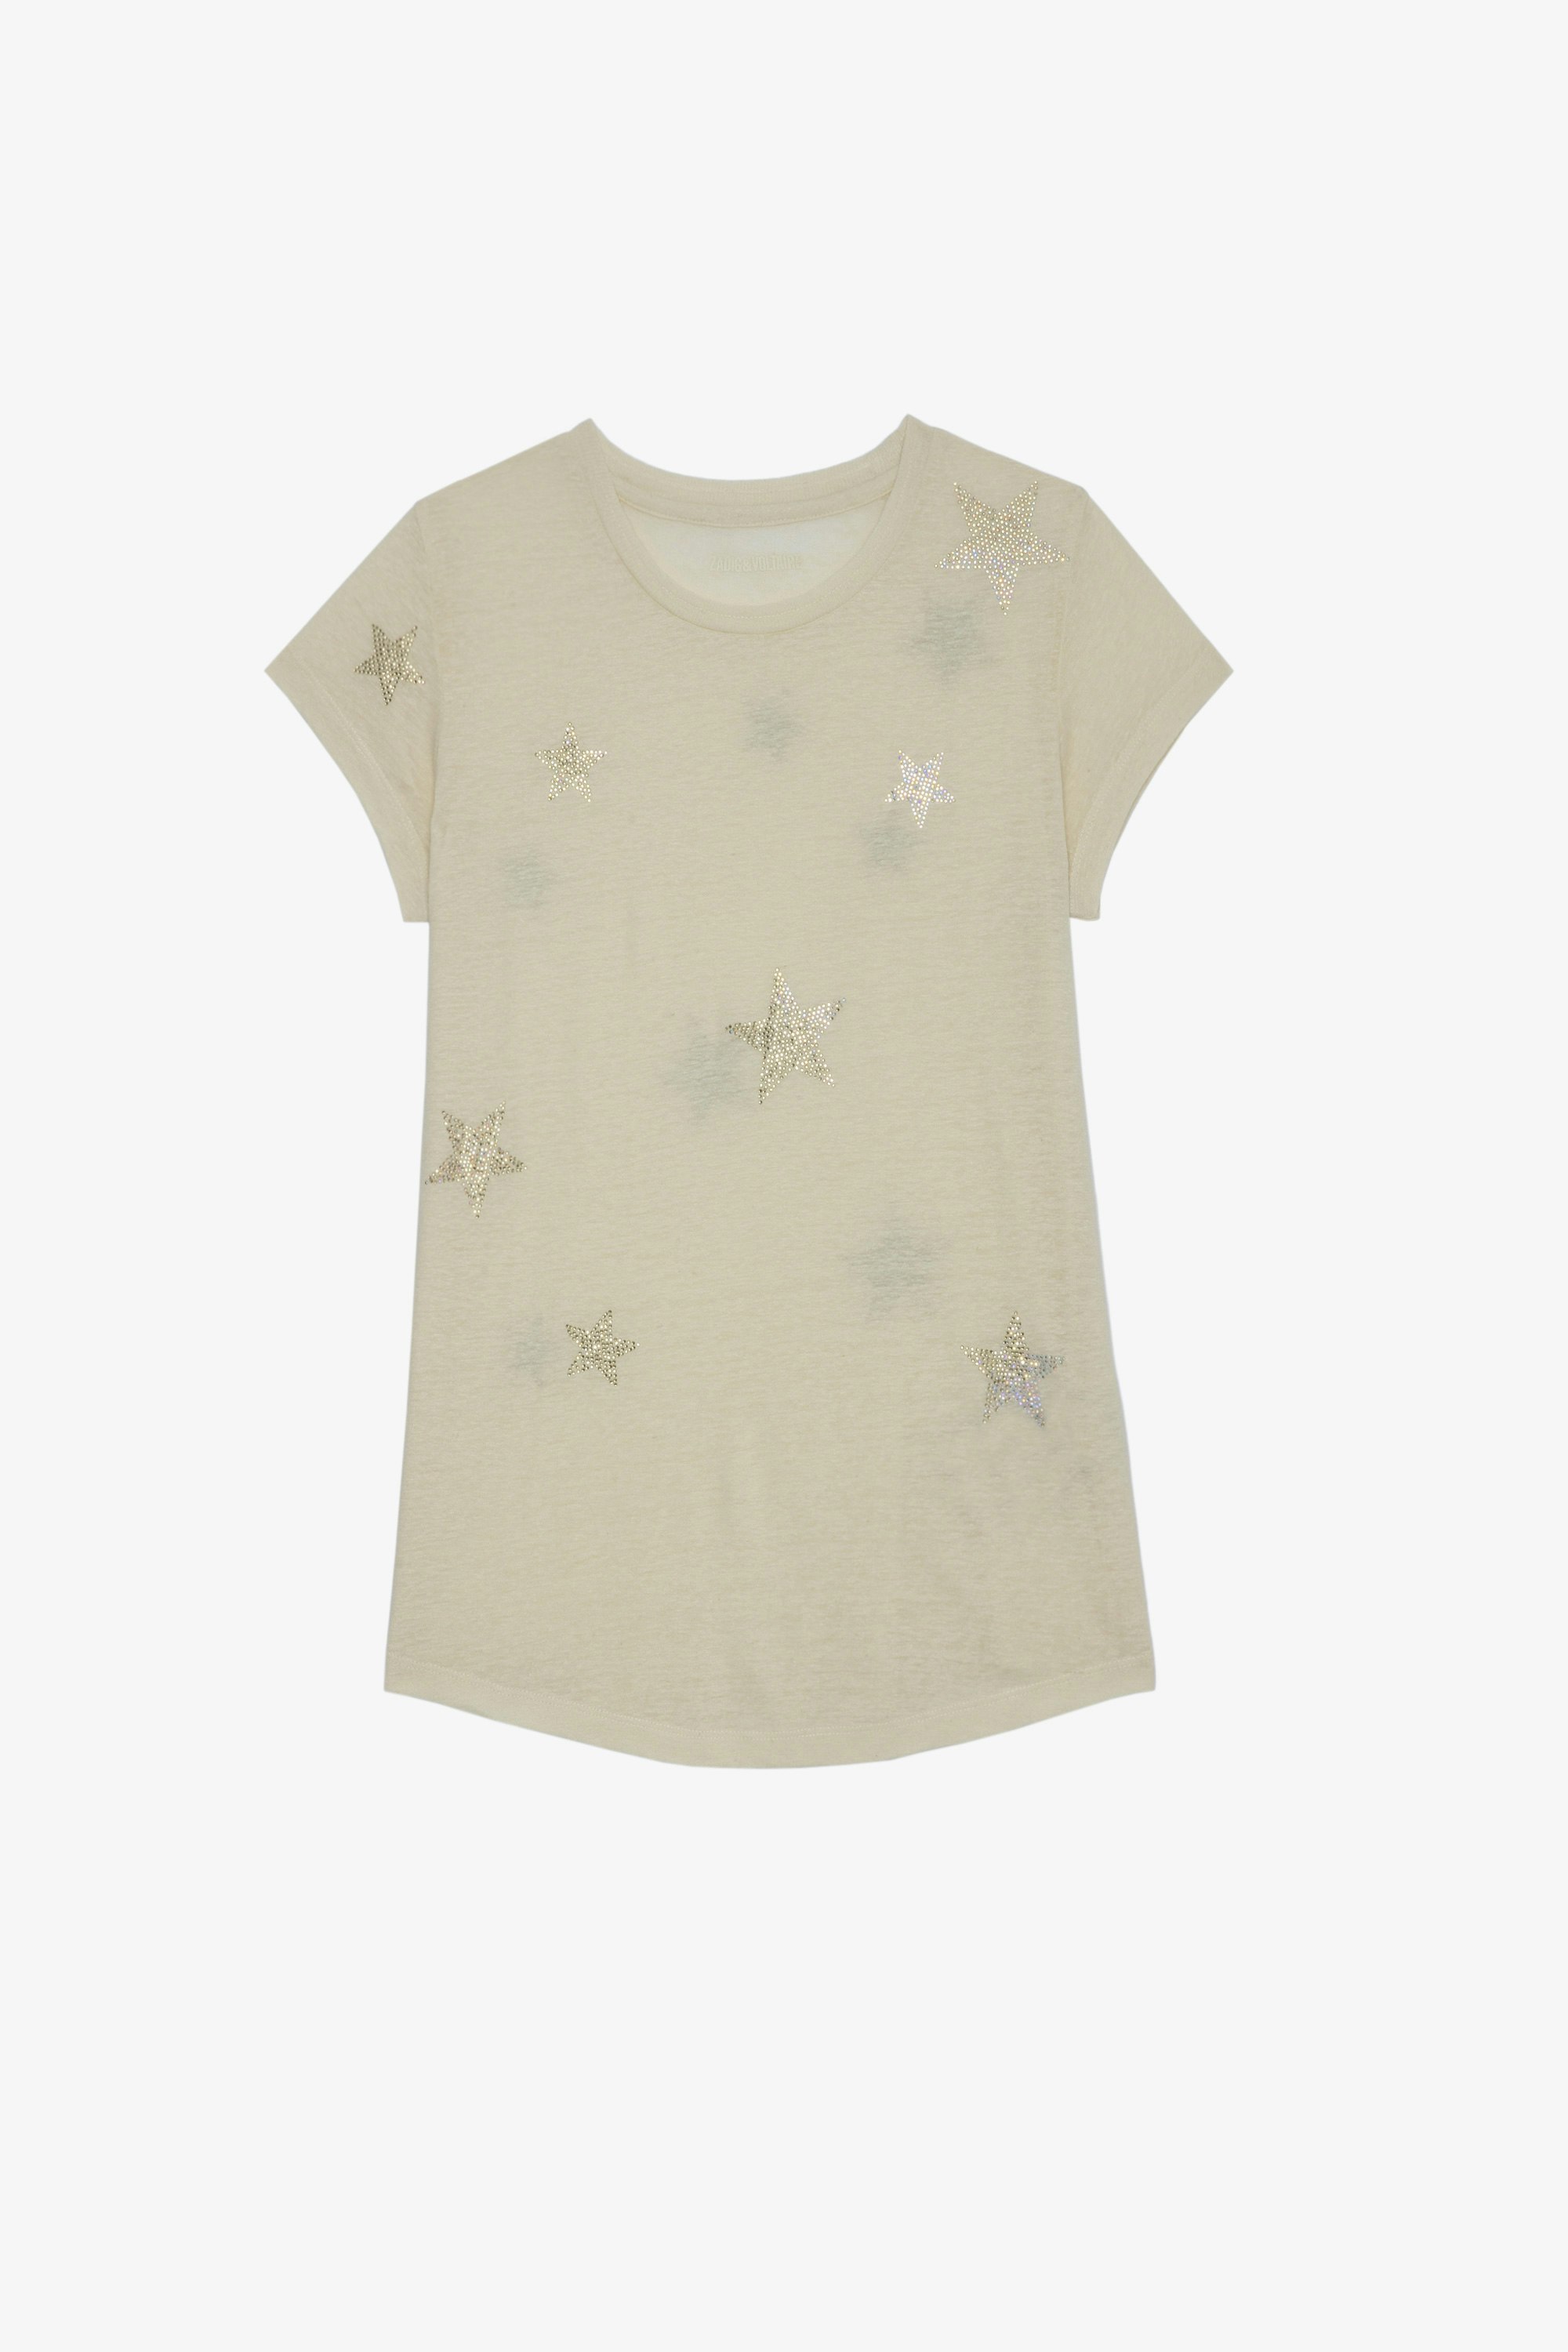 Skinny Stars Ｔシャツ Women’s beige cotton T-shirt with short sleeves and ZV wings motif on the back